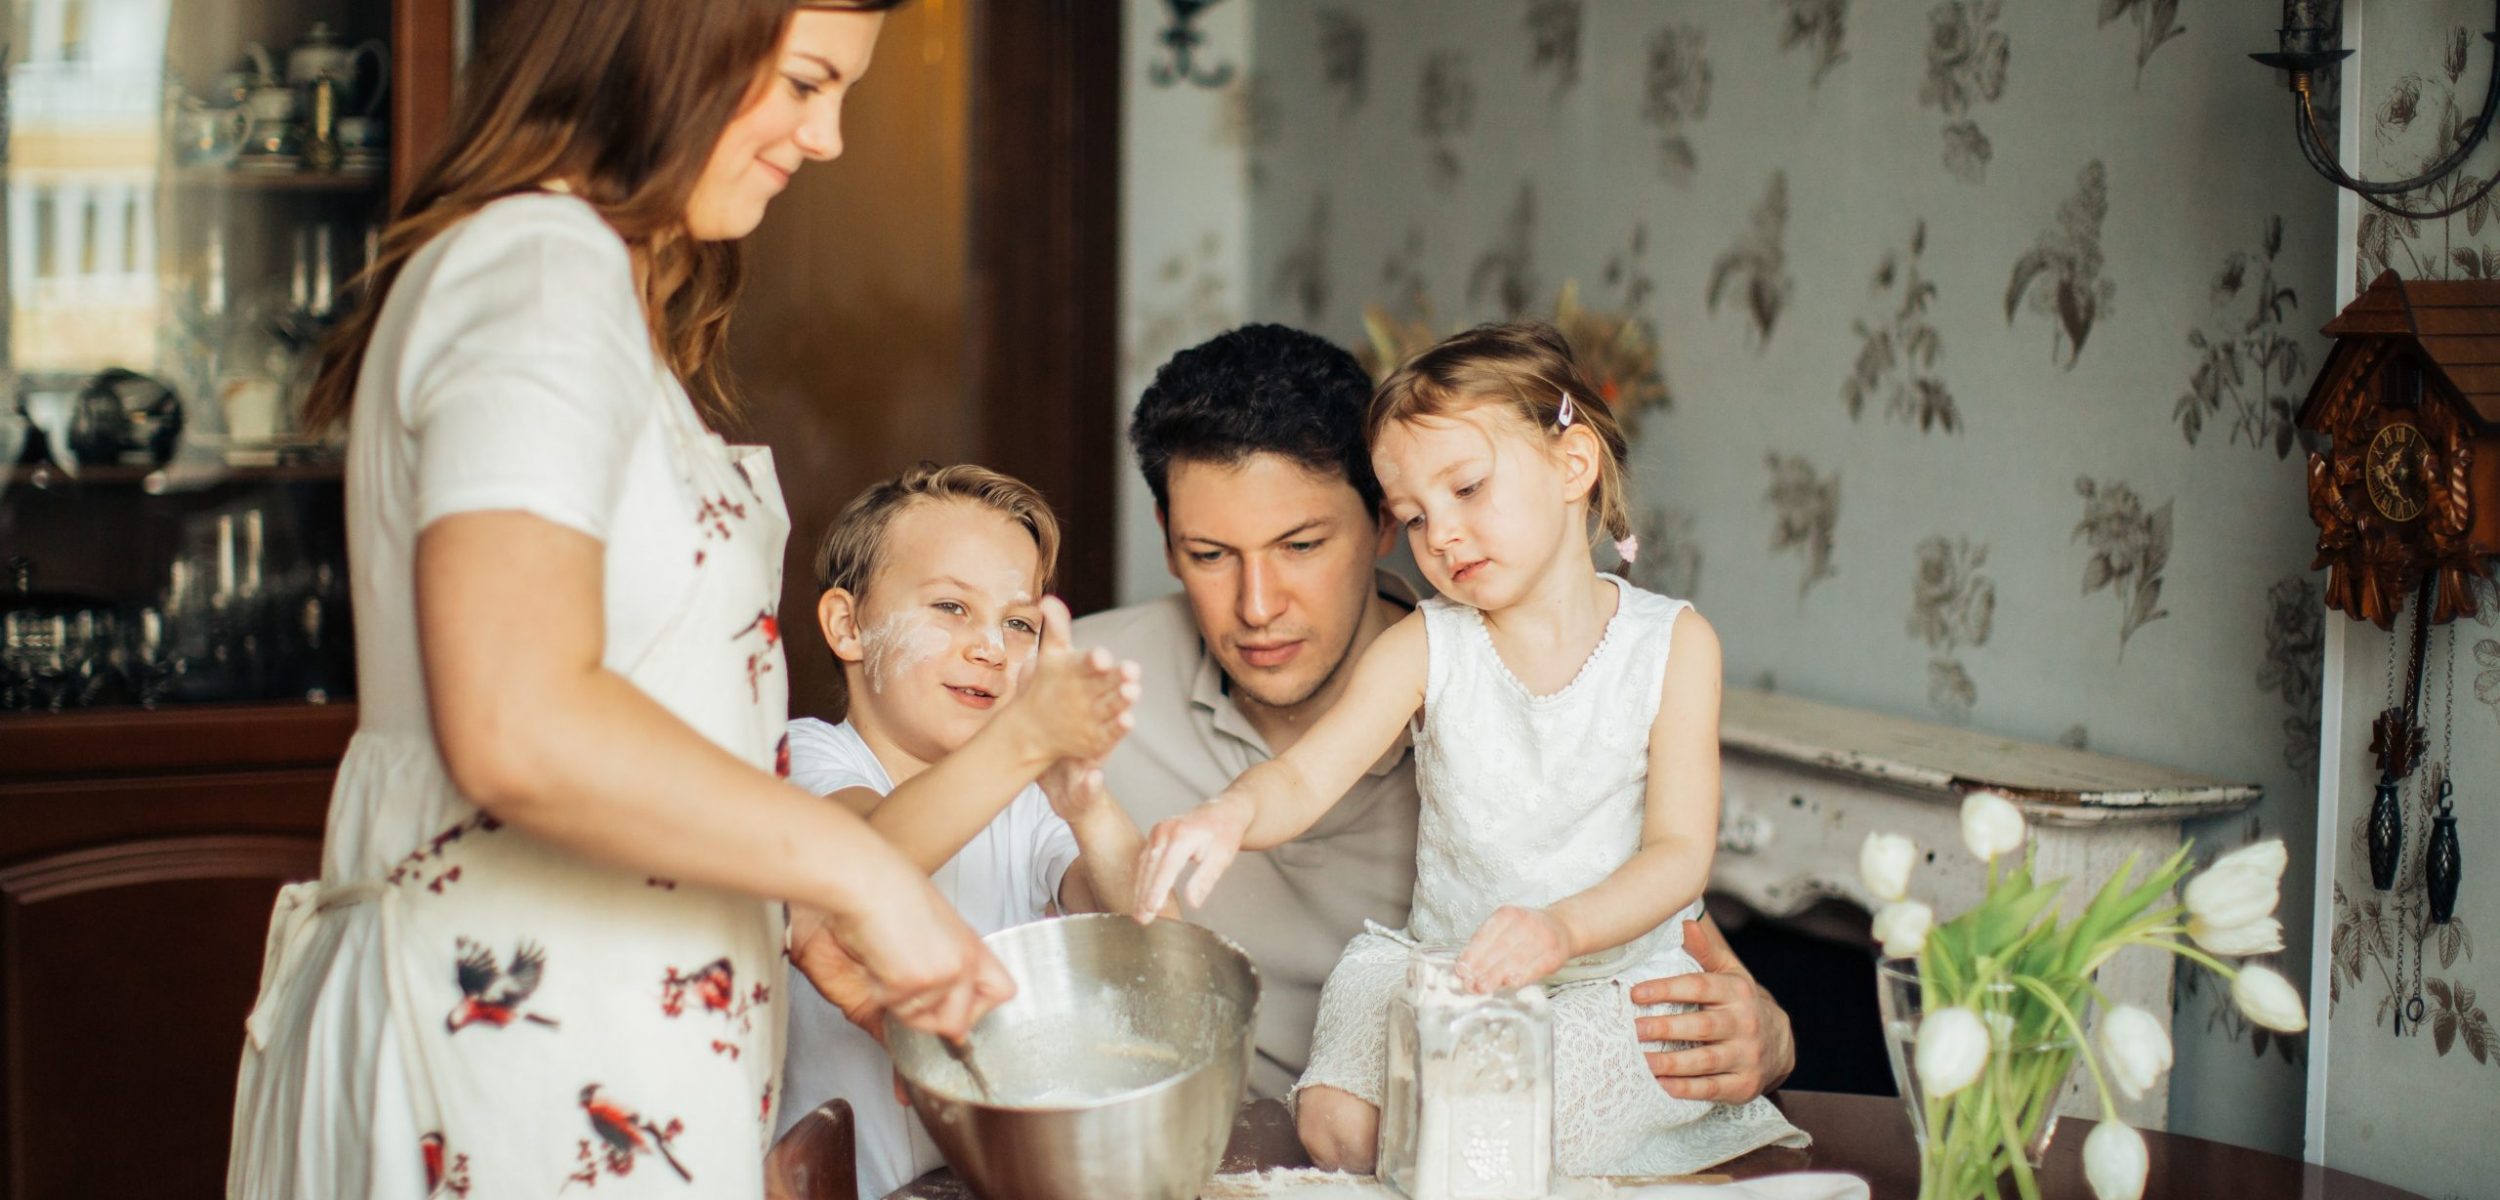 family baking together